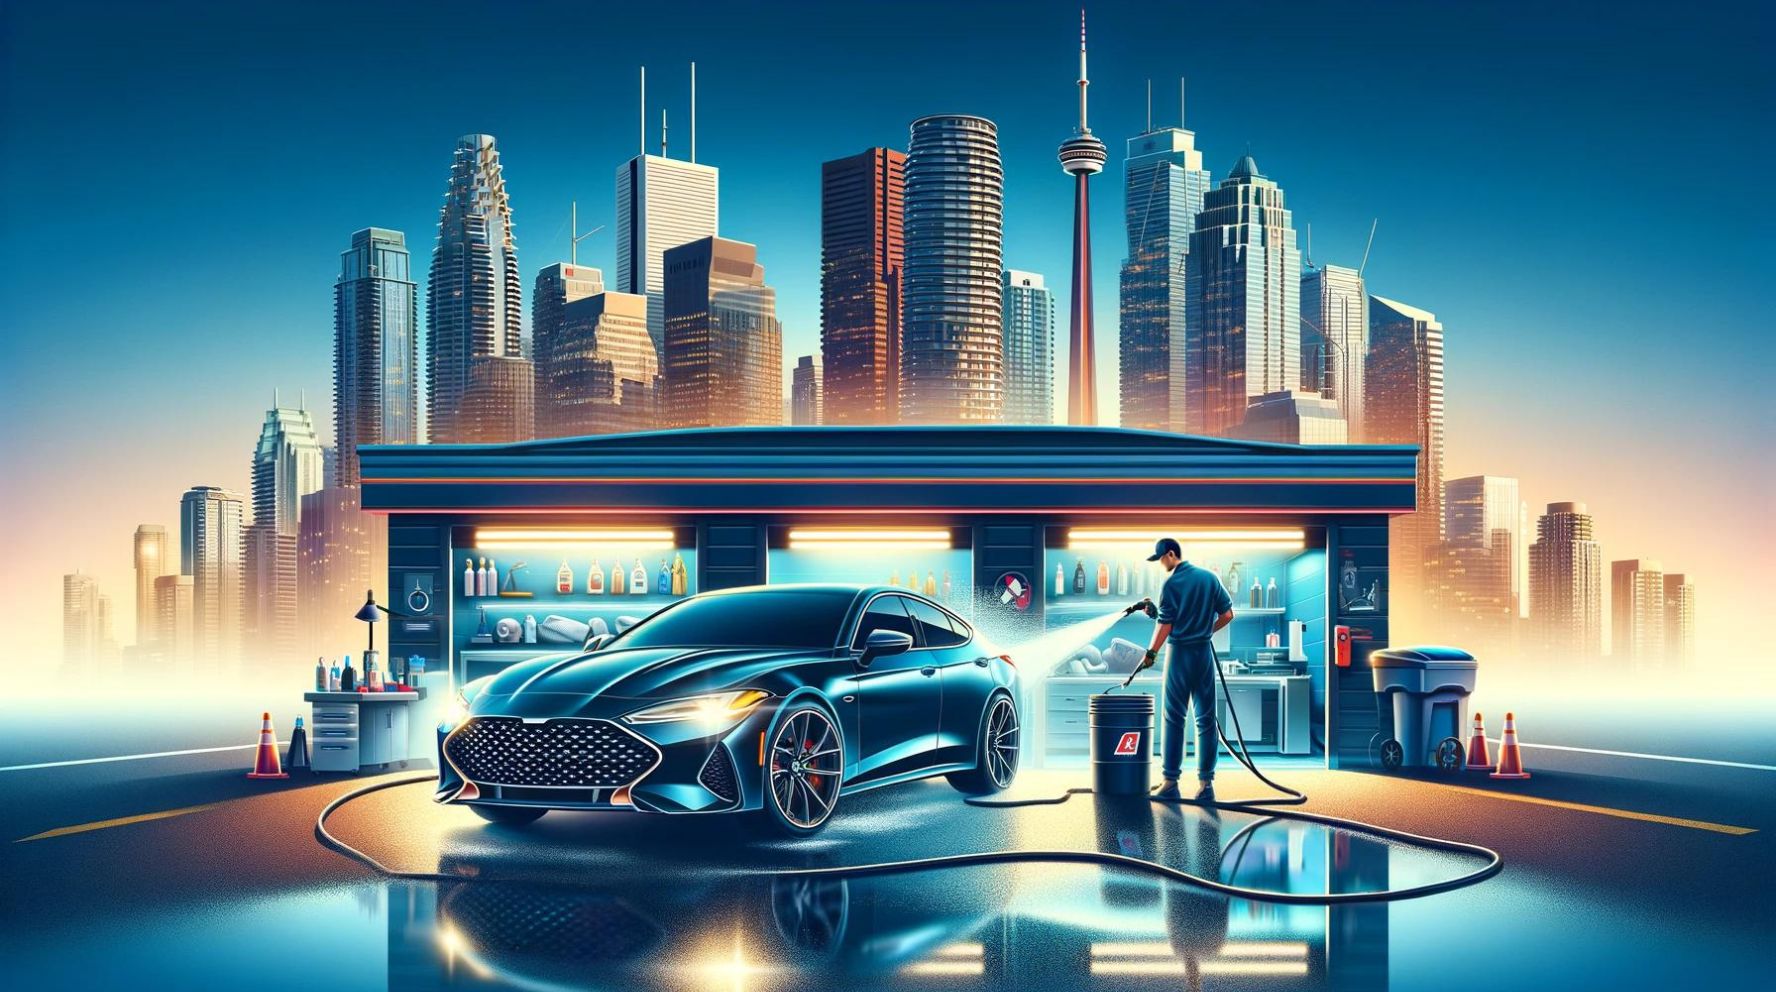 Sleek car receiving premium auto detailing in Mississauga, showcasing the meticulous care and expertise with the city's landmarks subtly in the background.